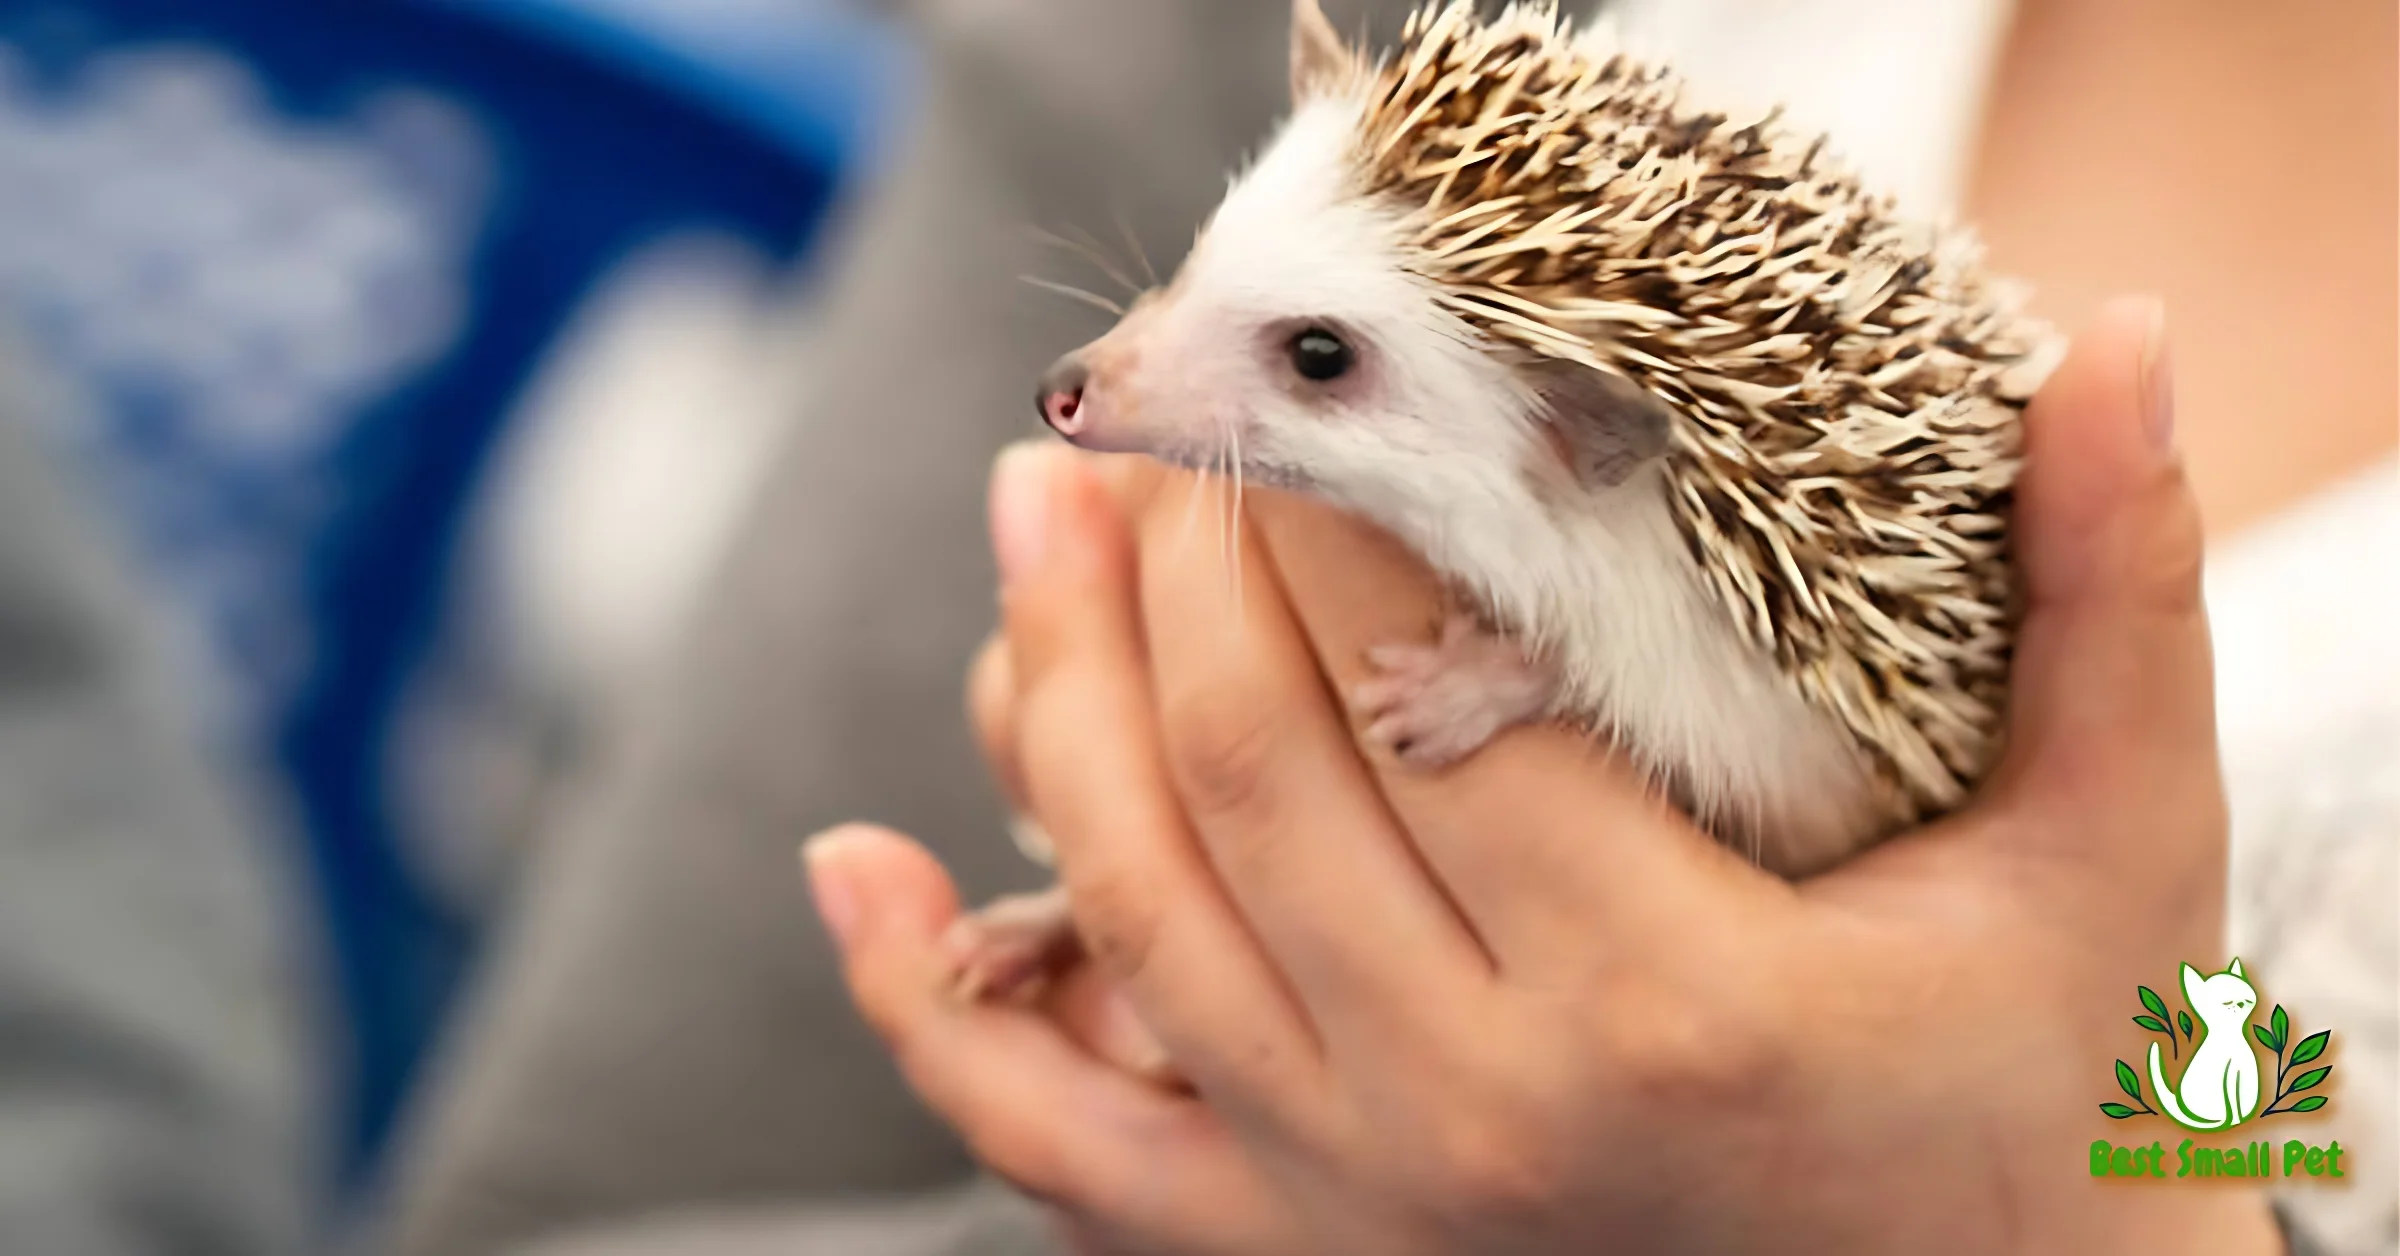 Are Hedgehogs Good Pets: What do the experts think?